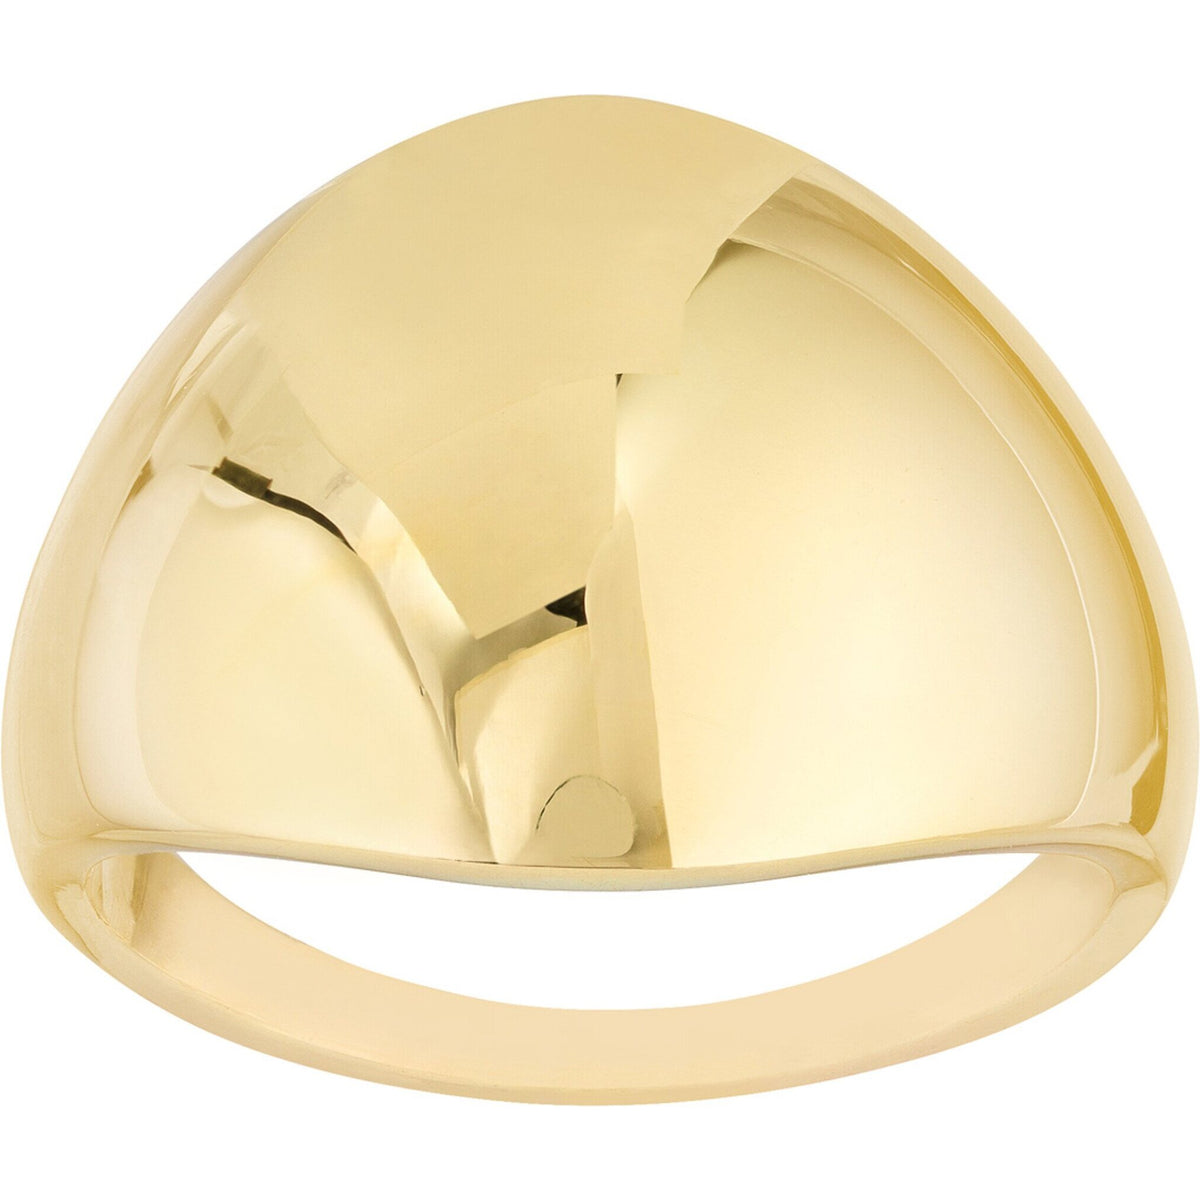 Olas d'Oro 6" Ring - 14K Yellow Gold Graduated Dome Signet Ring